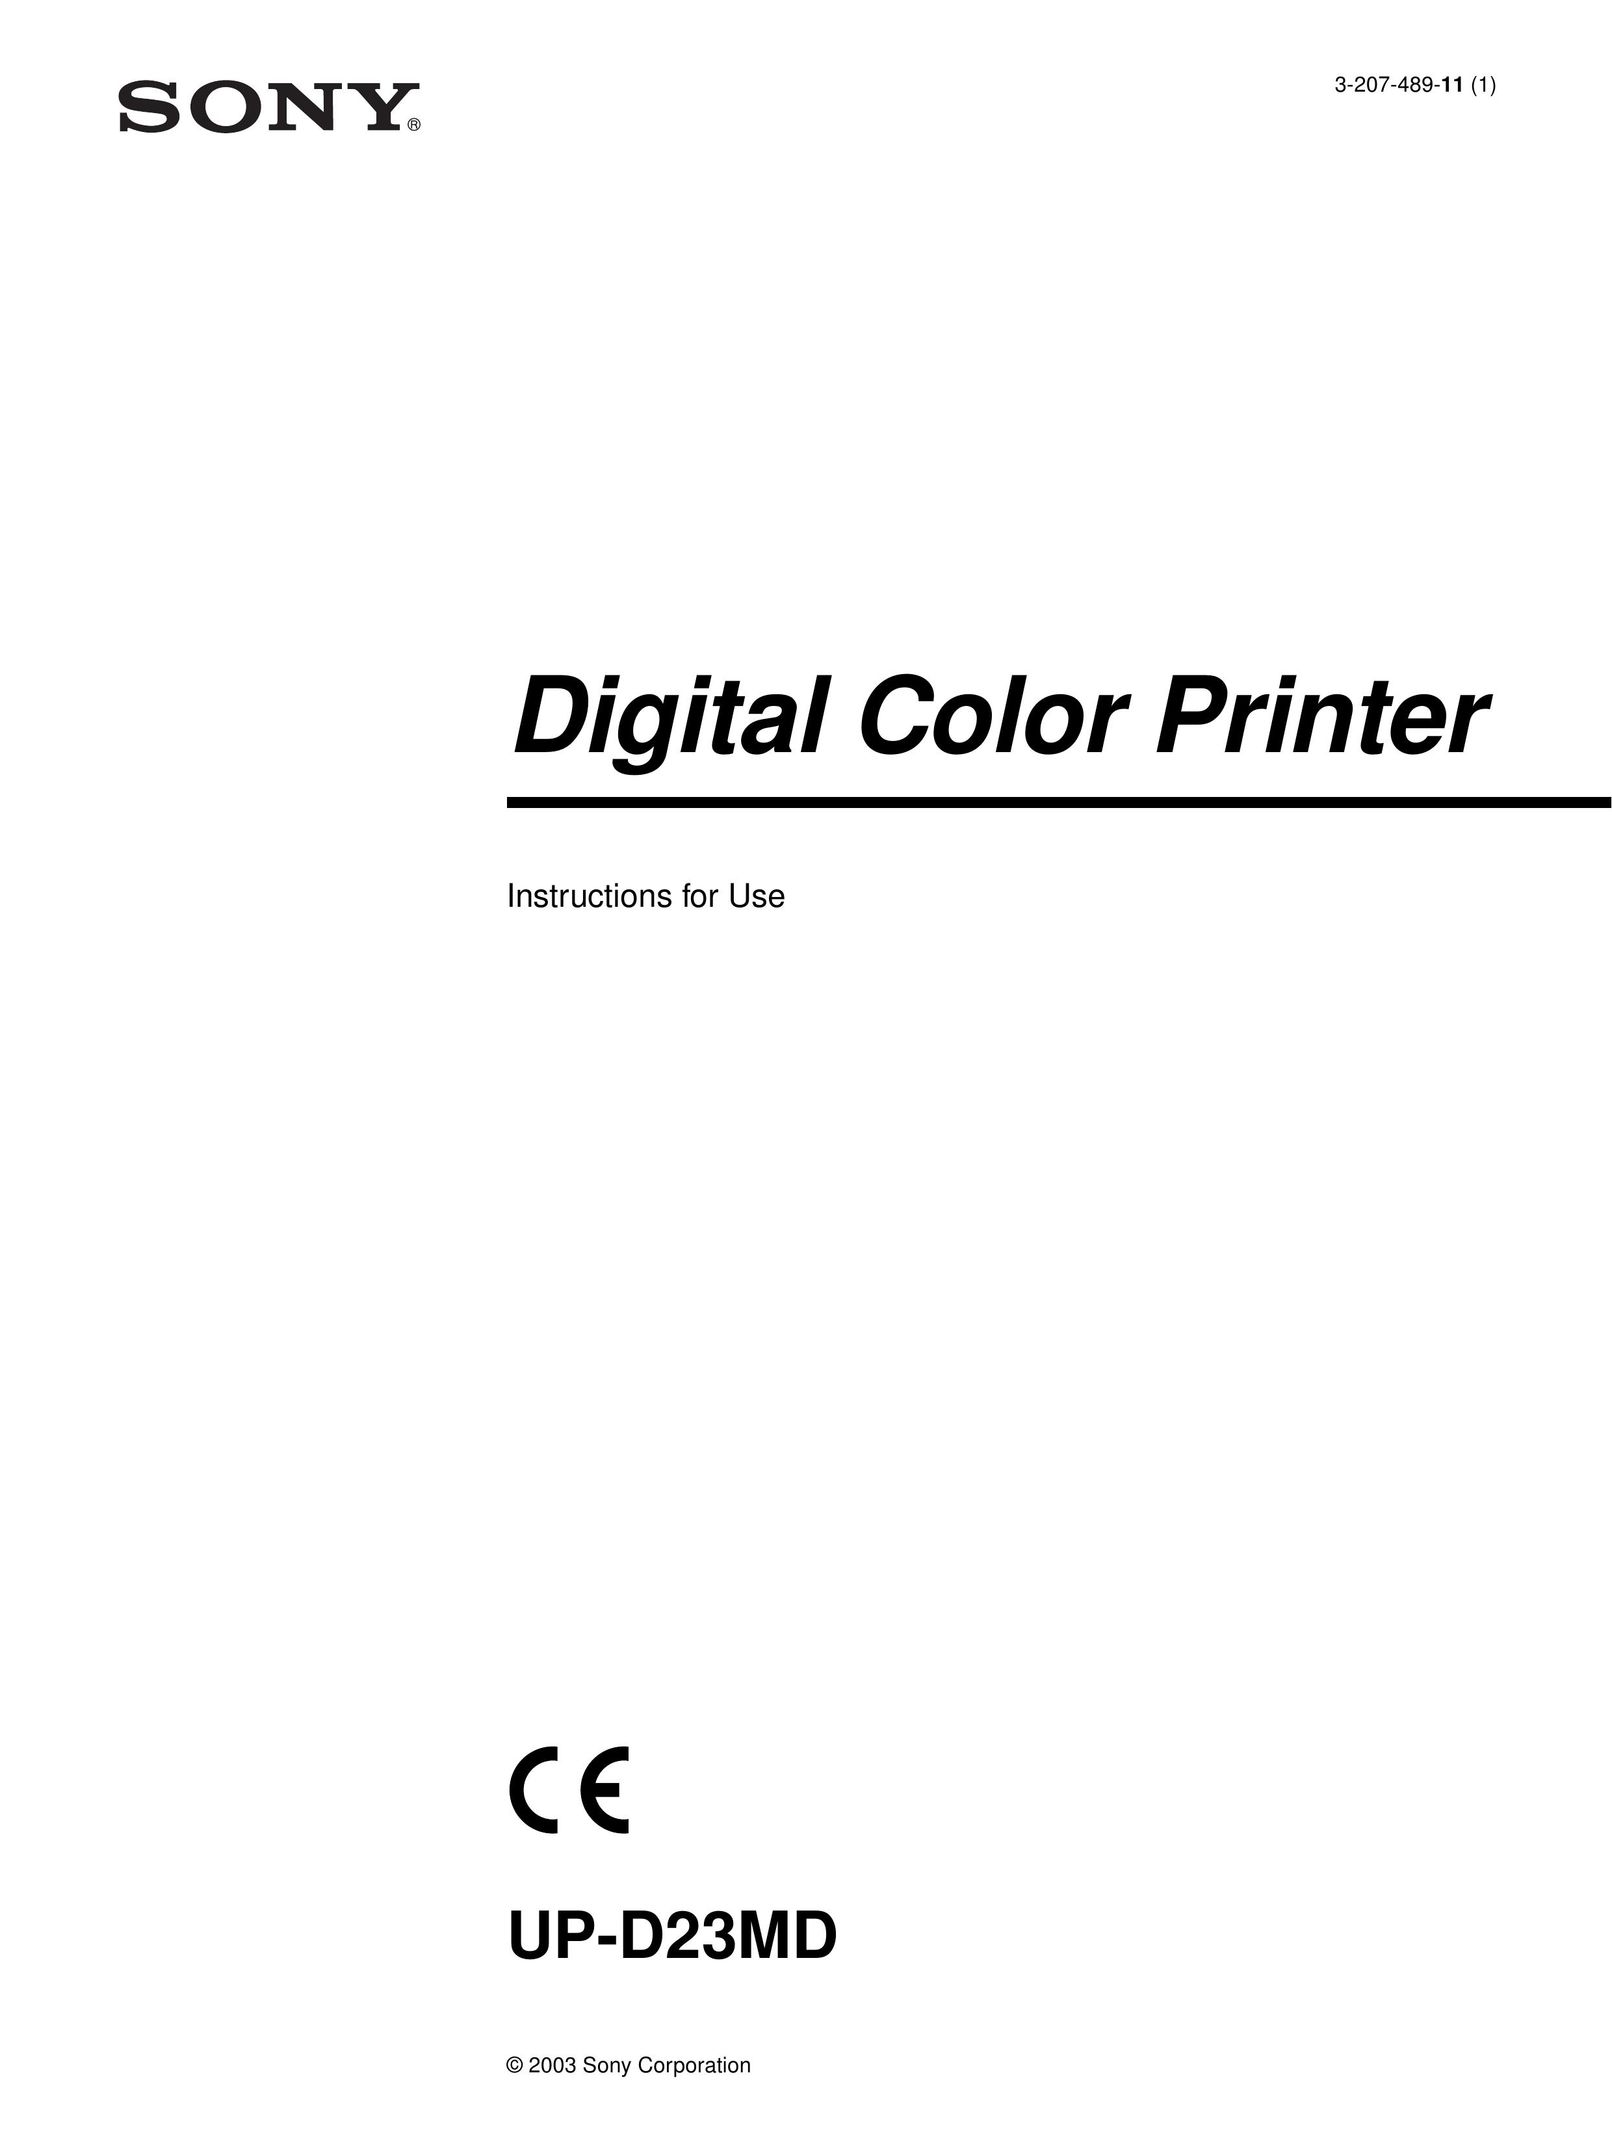 Sony UP-D23MD All in One Printer User Manual